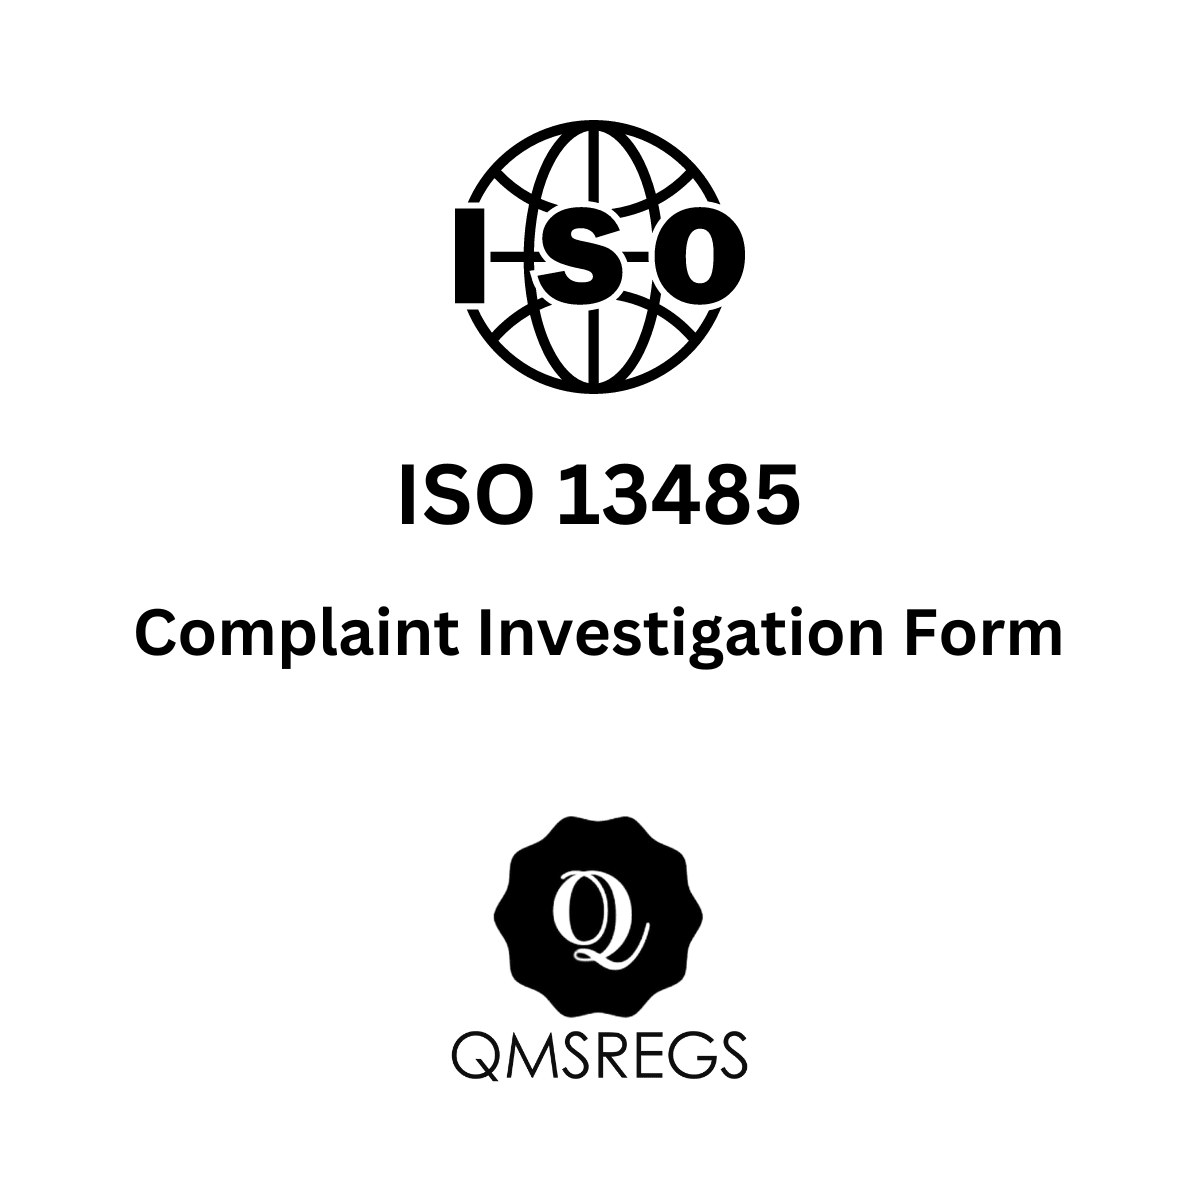 ISO 13485 complaint investigation form template